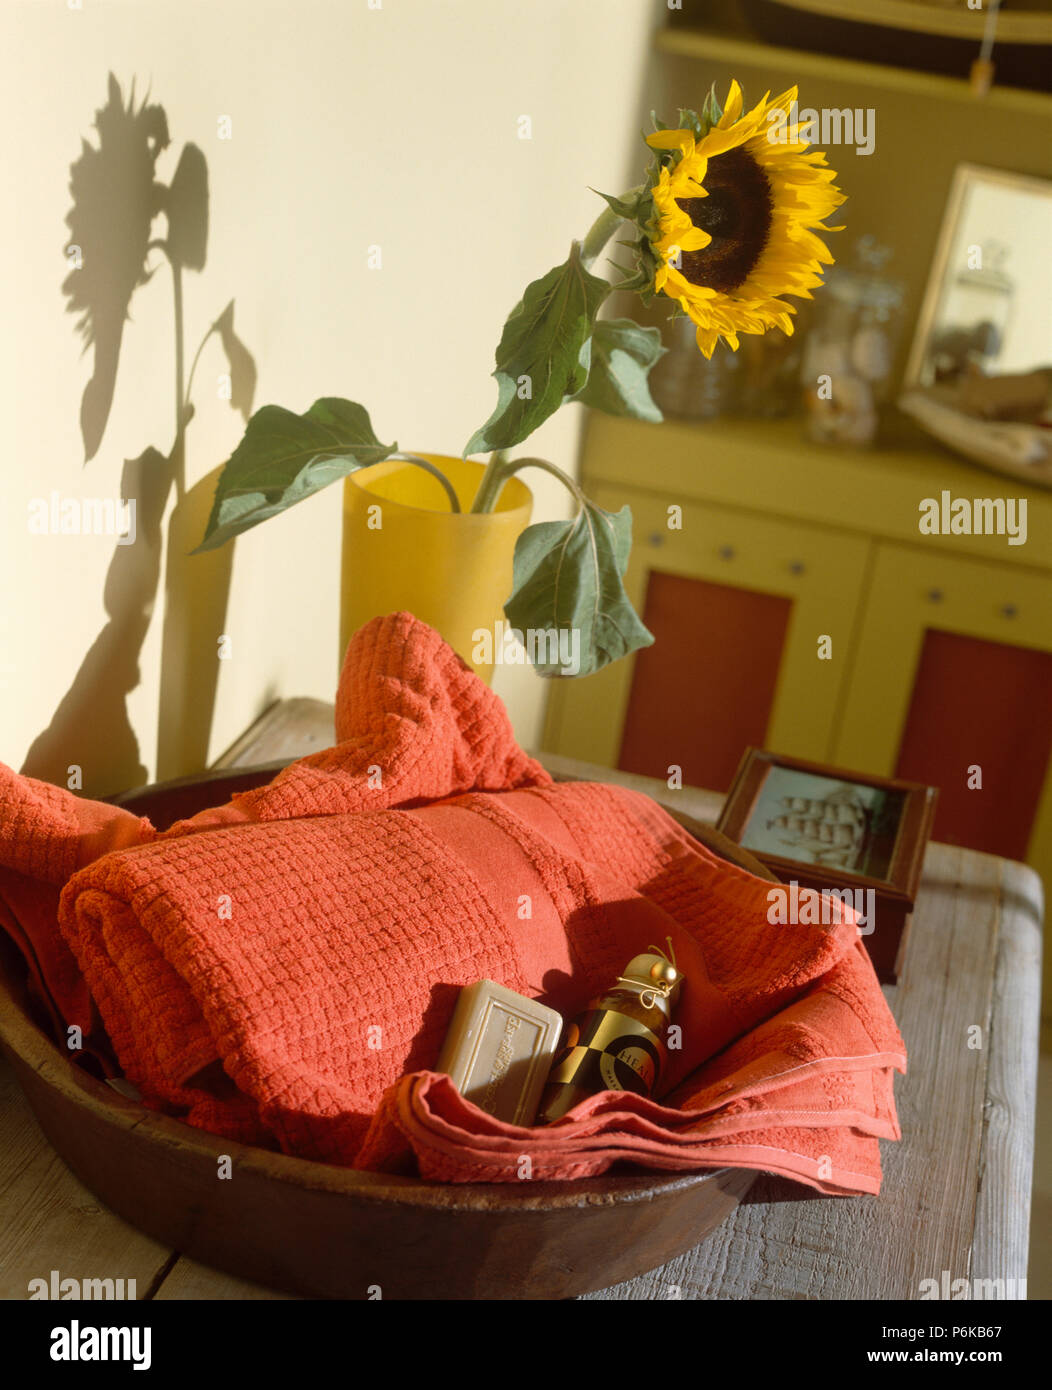 Close-up of salmon-pink towl in bowl on table with single sunflower in yellow vase Stock Photo